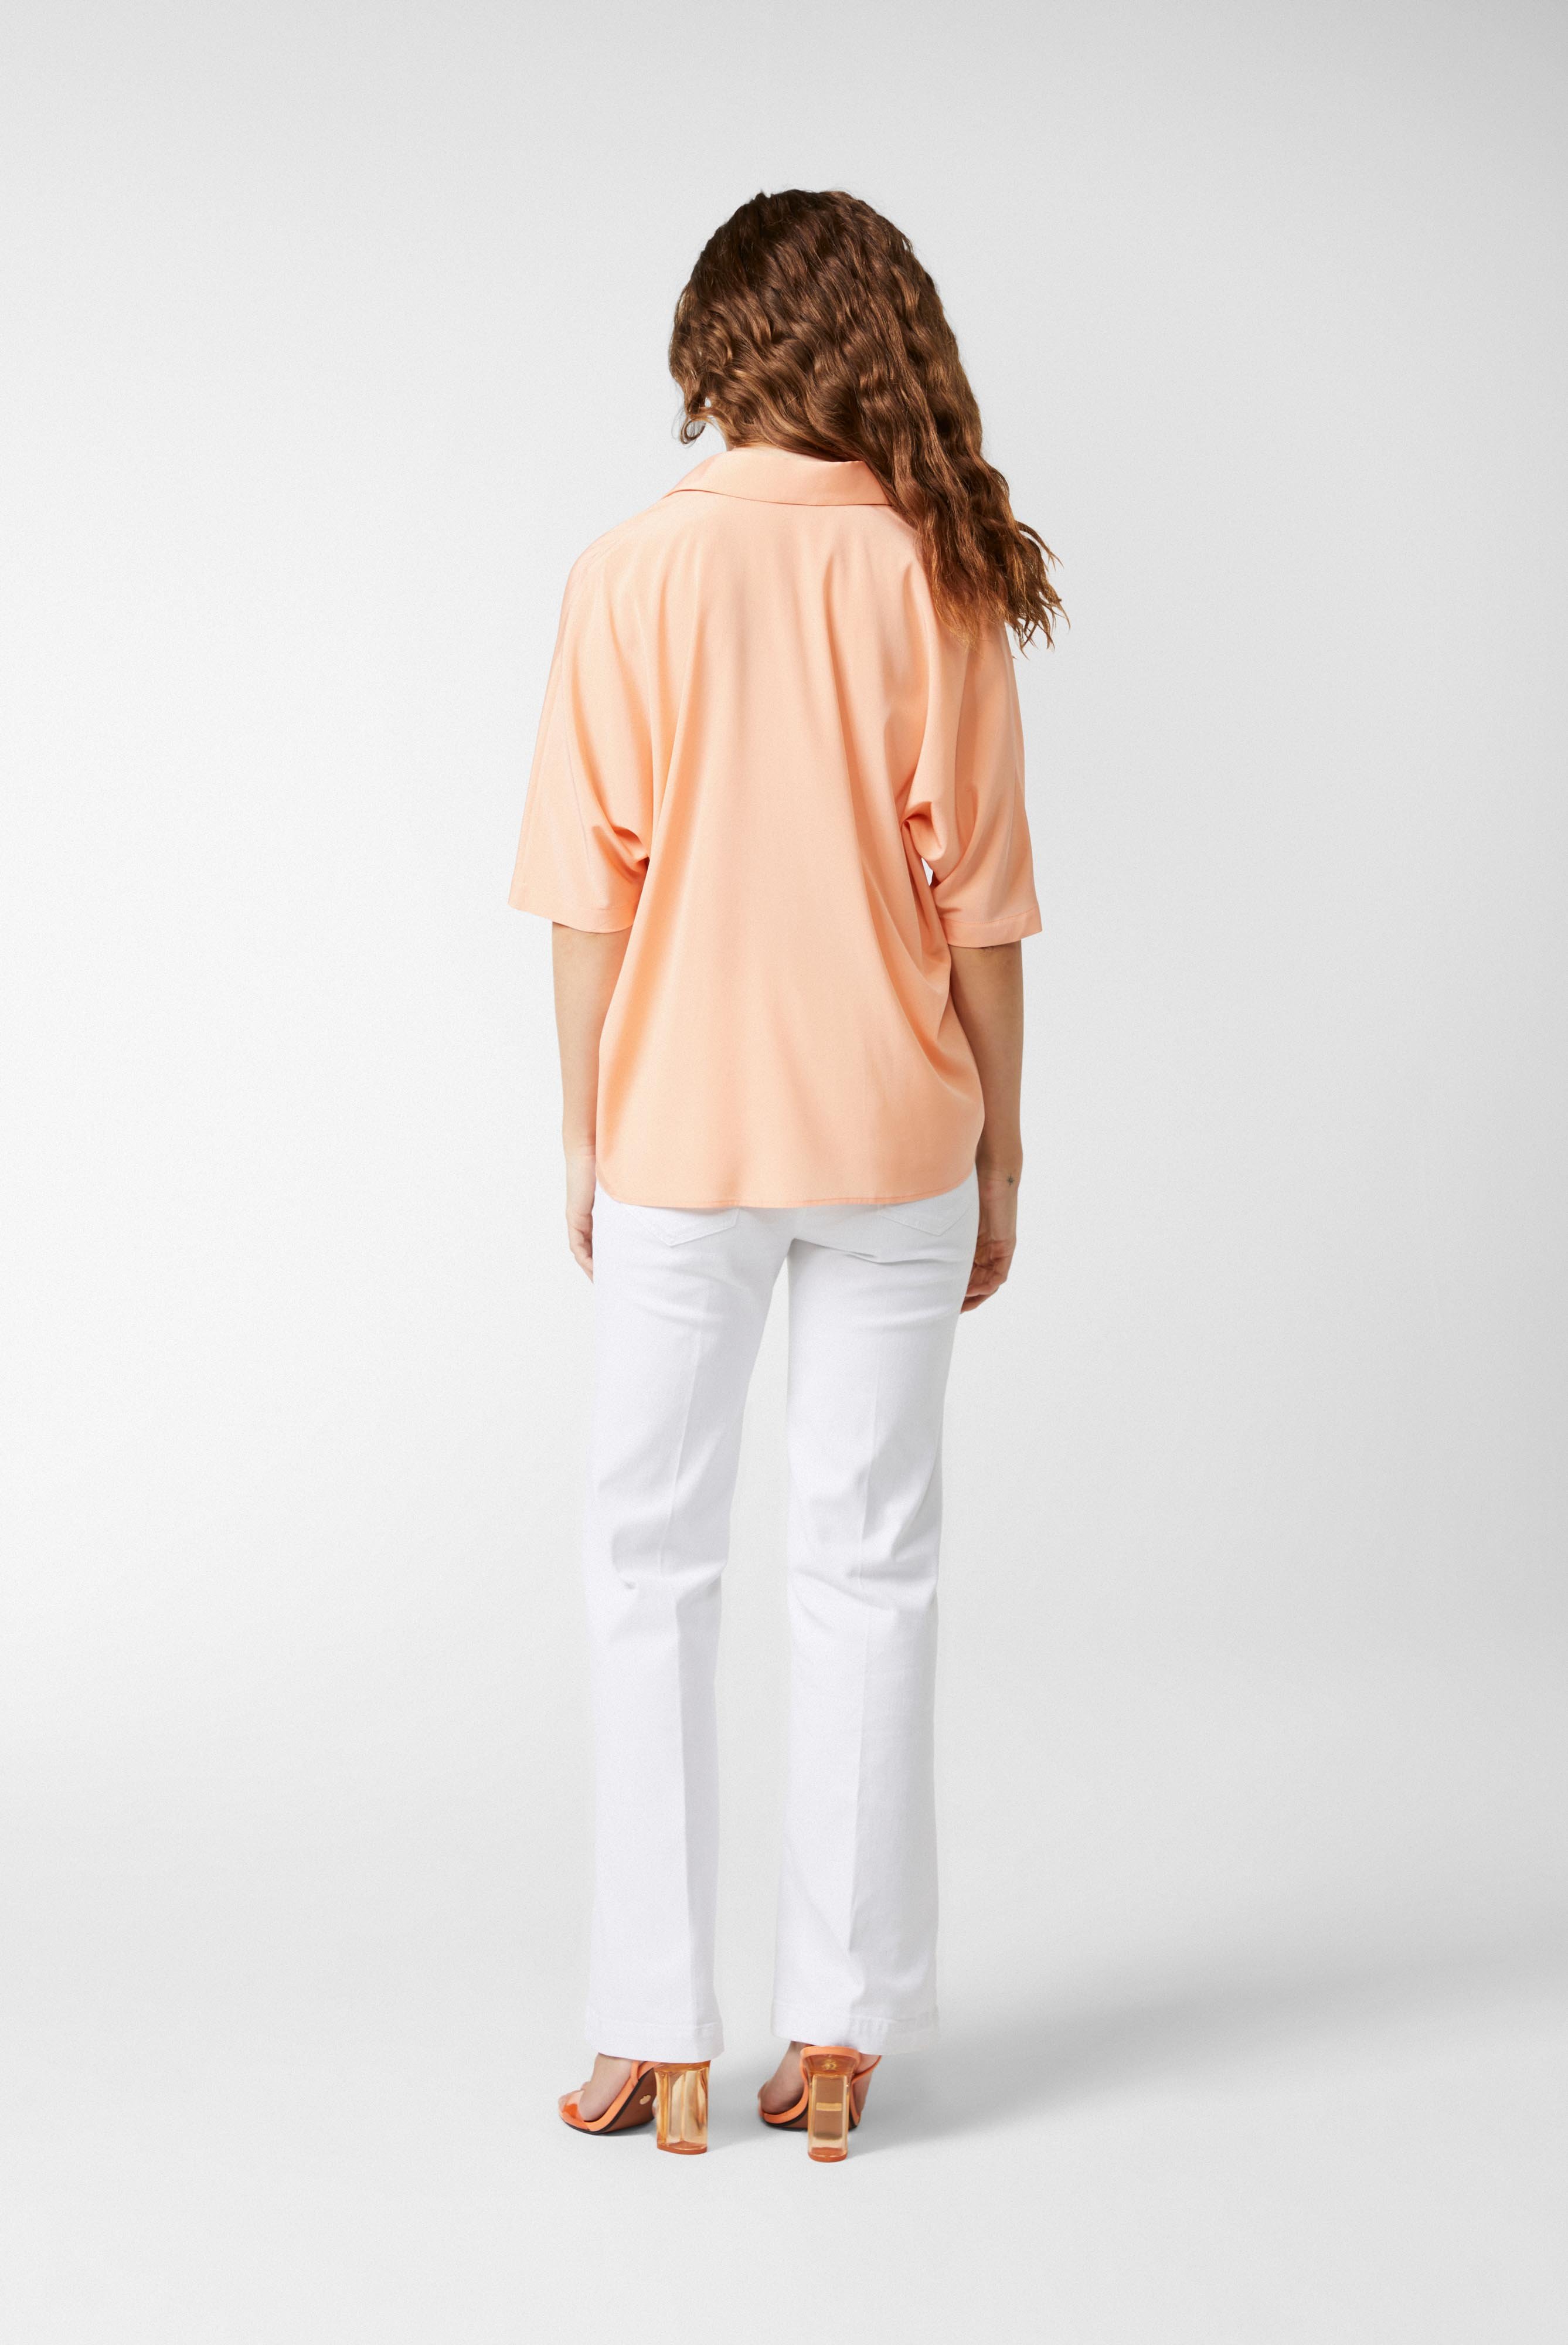 Casual Blouses+Shirt with silk and stretch+05.525X.07.155553.320.40